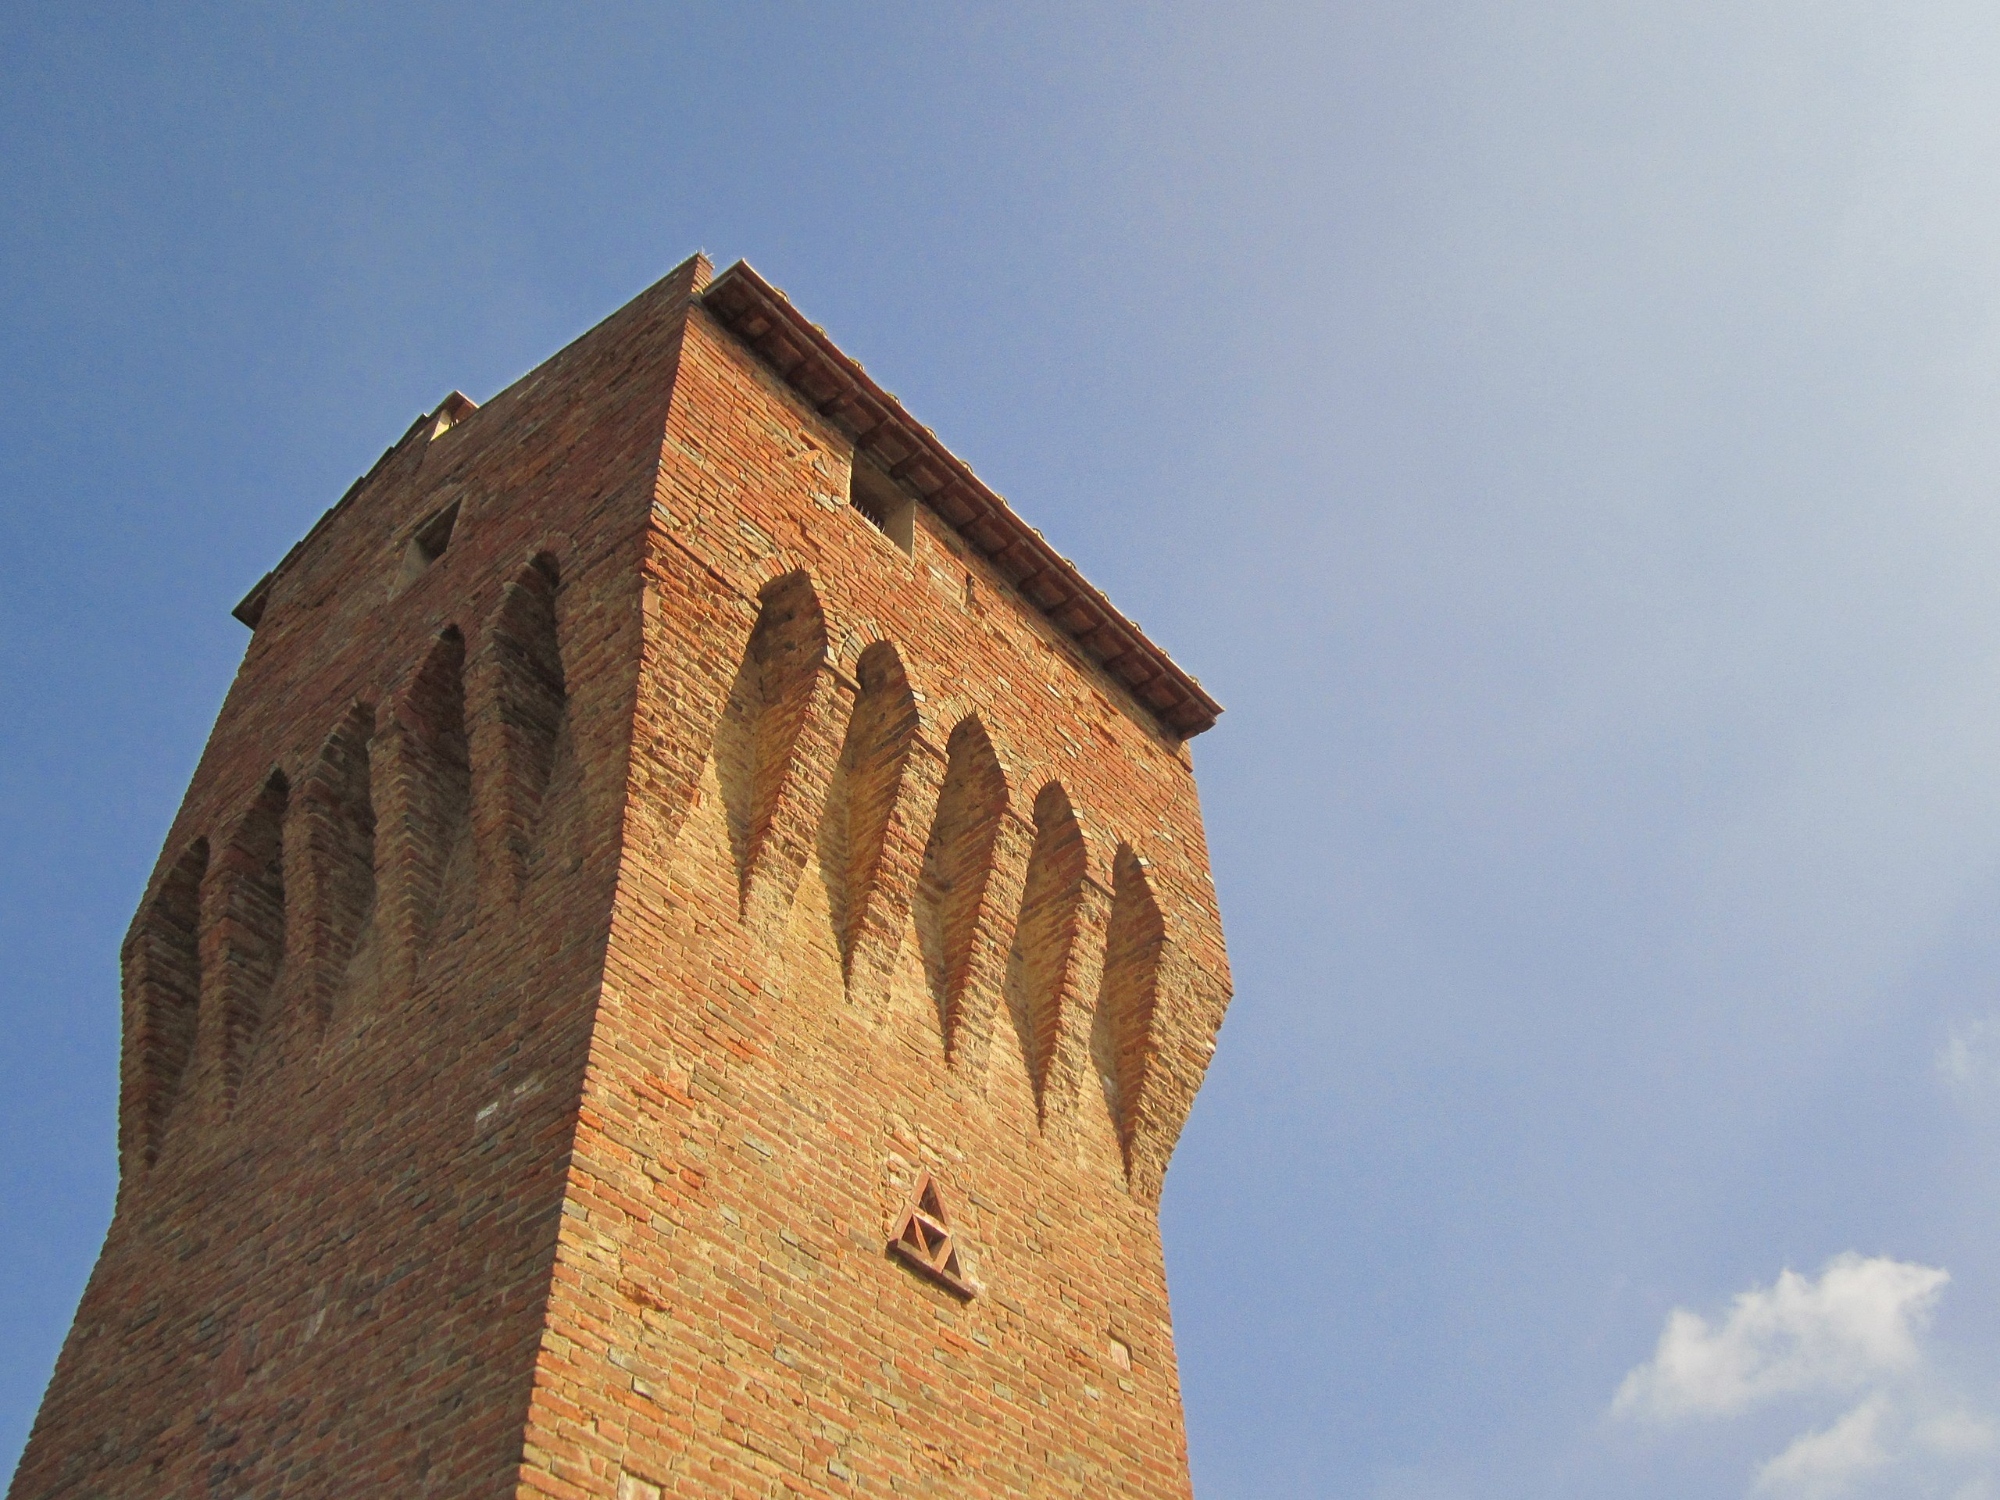 Crenellated Tower of San Matteo | Visit Tuscany